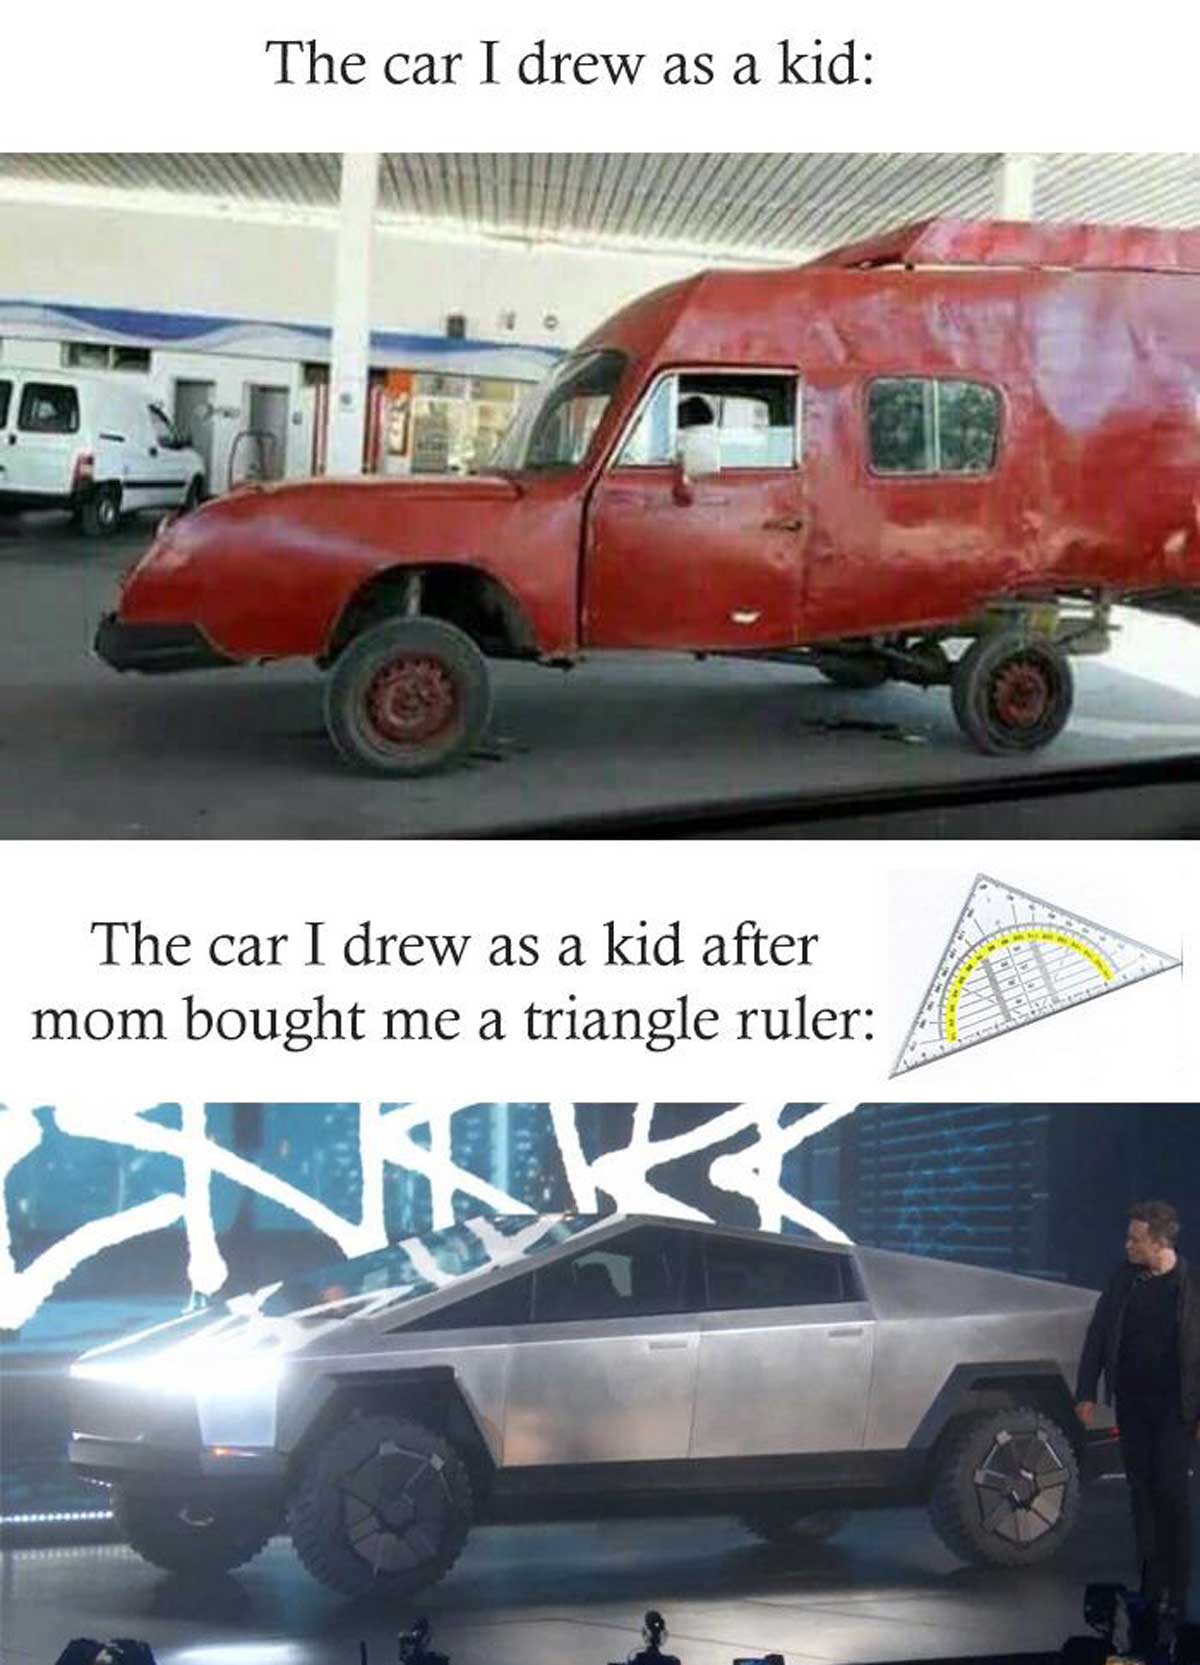 Tesla Cybertruck meme that says 'the car i drew as a kid' and a crazy handmade car and then the caption 'the car i drew as a kid after mom bought me a triangle ruler' and a picture of the Tesla Cybertruck